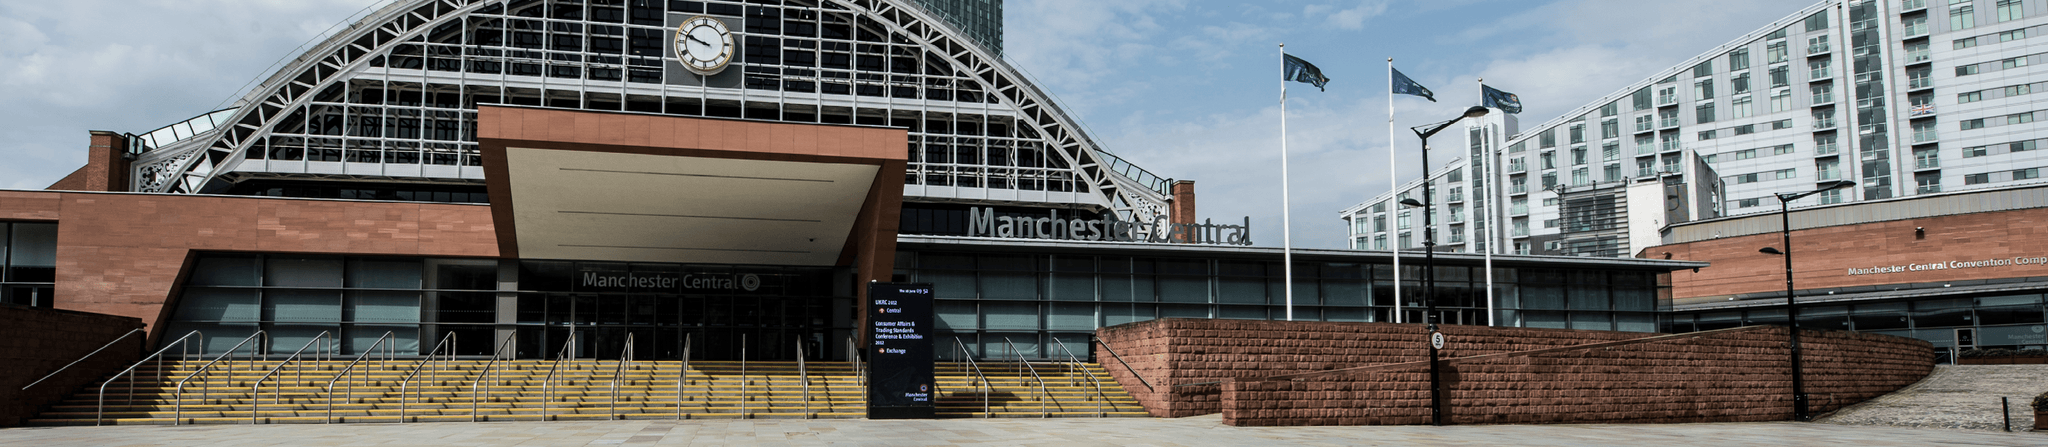 Manchester Central Outside Image